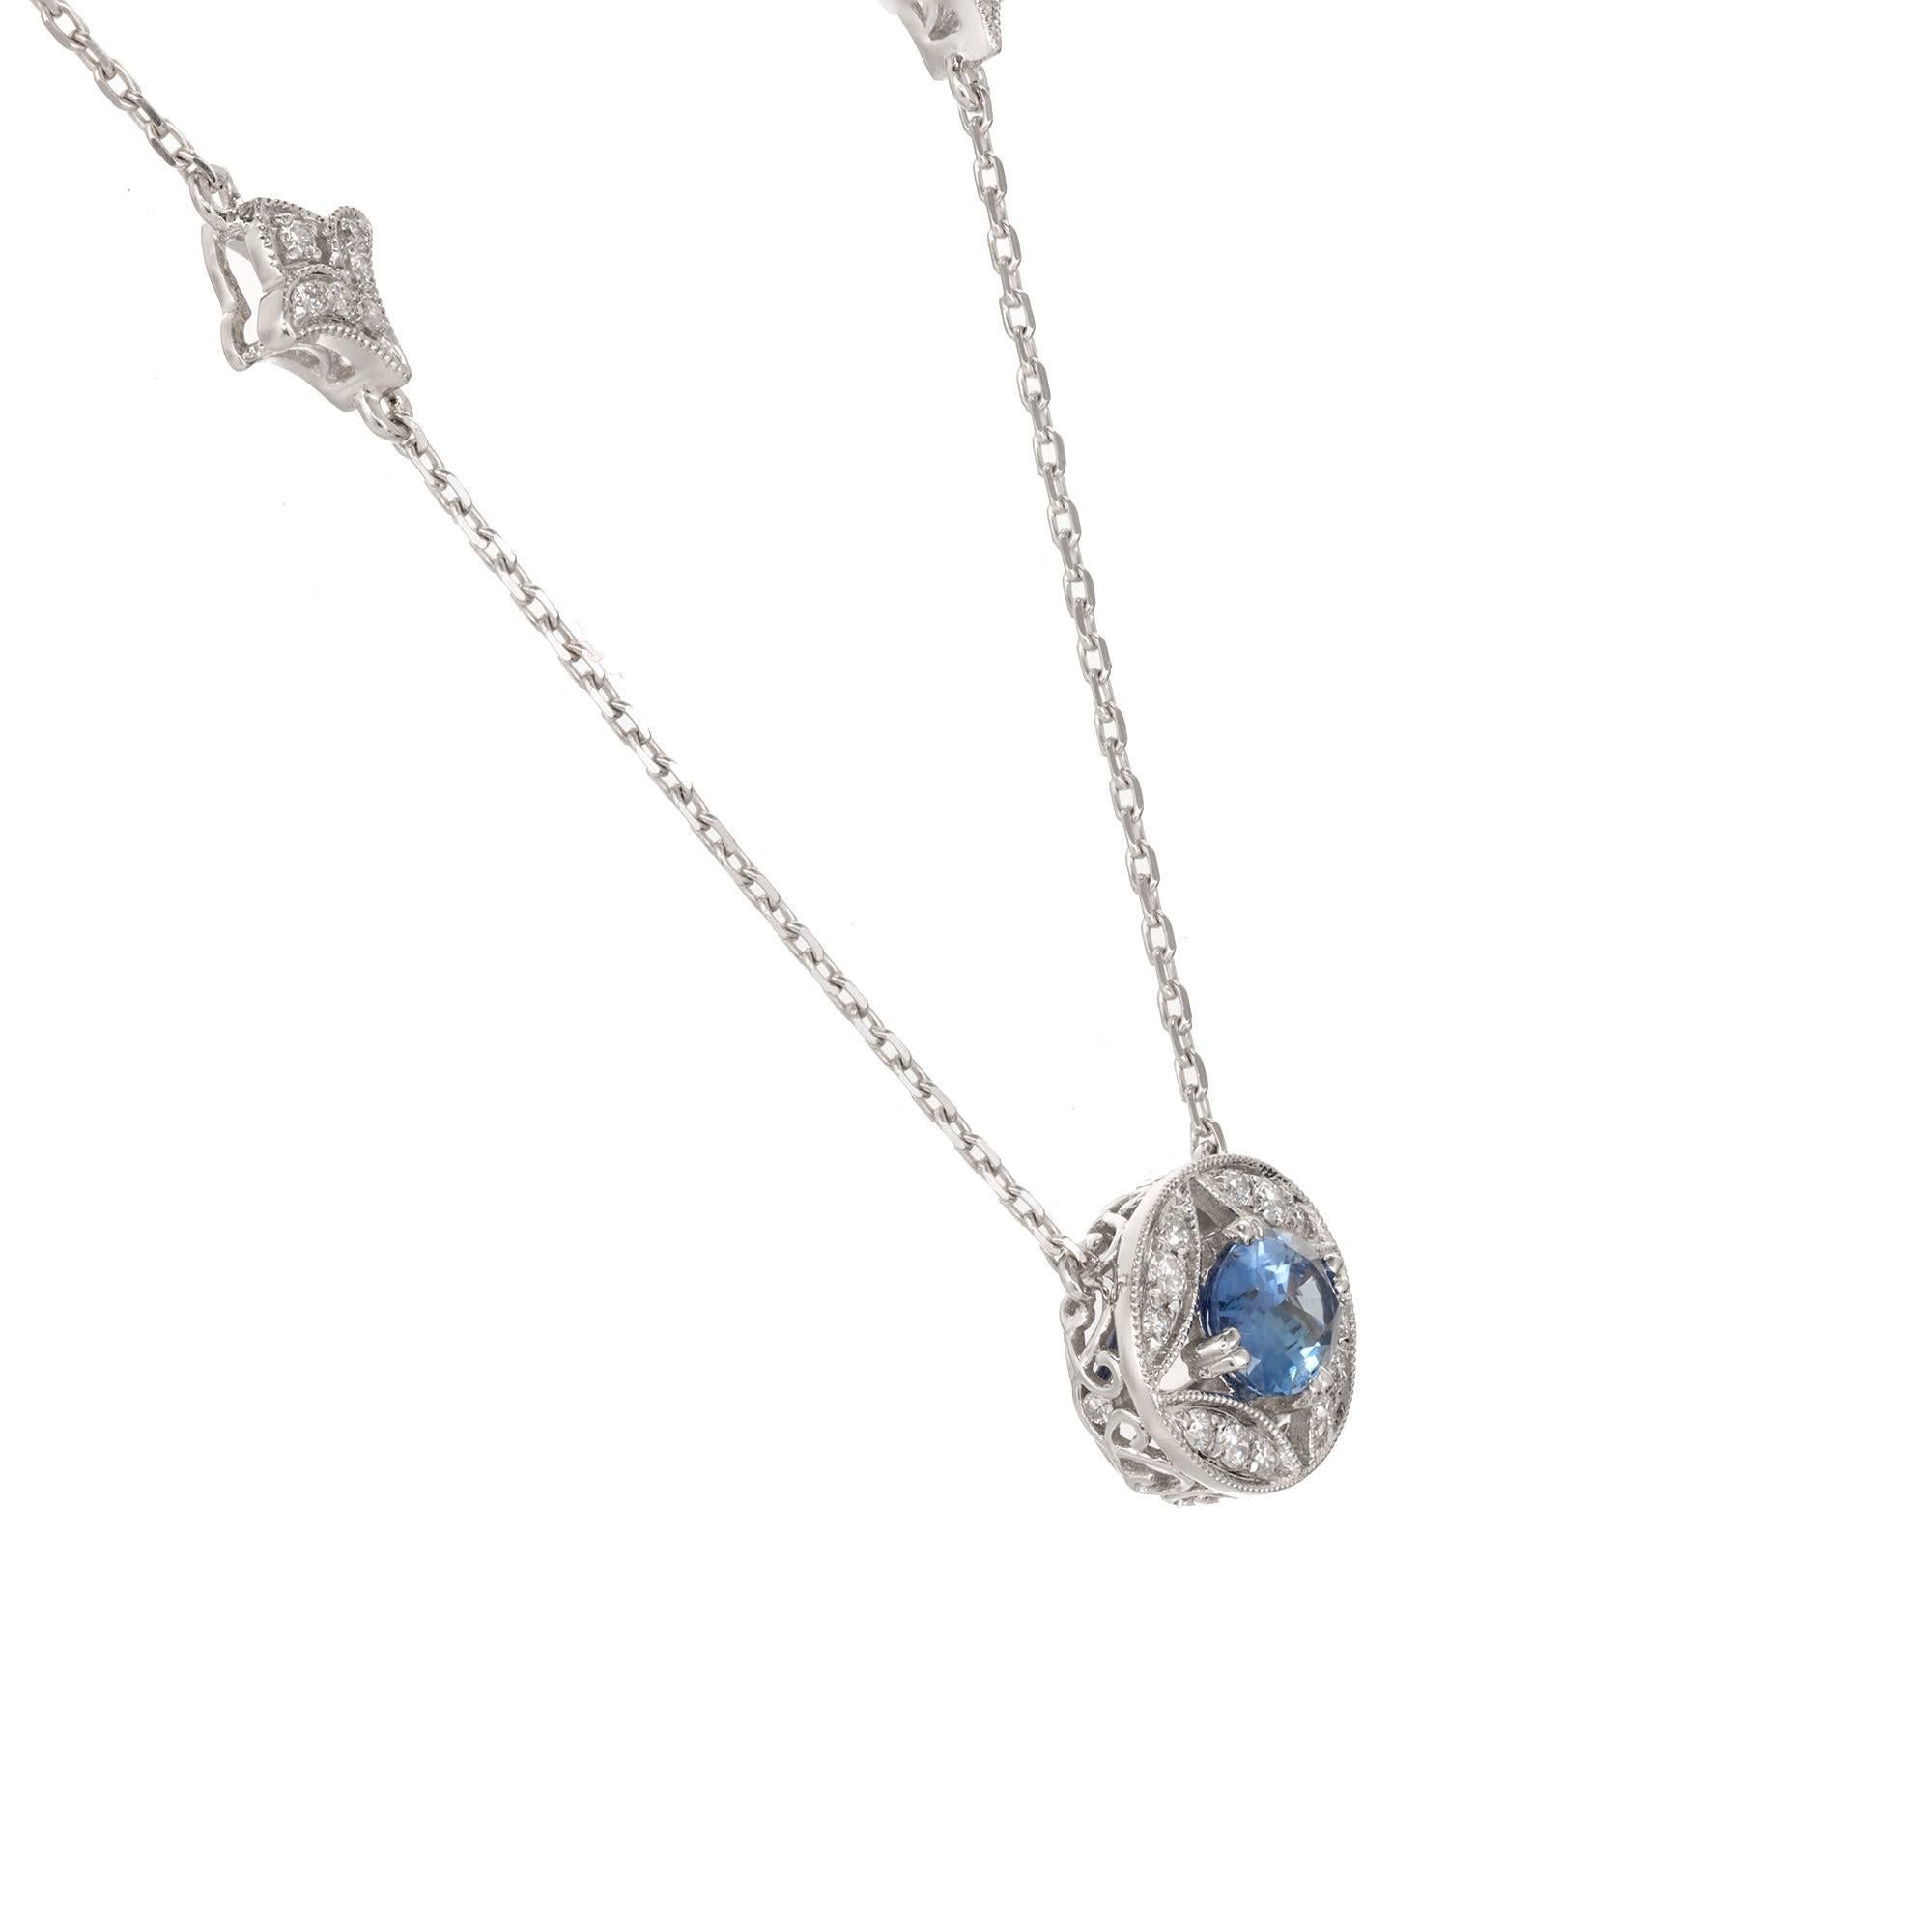 Oval Sapphire Diamond pendant necklace with a bright blue oval Sapphire center stone and accent diamonds, on a 17 inch chain.  

14k white gold
1 oval bright blue Sapphire, approx. total weight 1.00cts, SI
46 round full cut Diamonds, approx. total